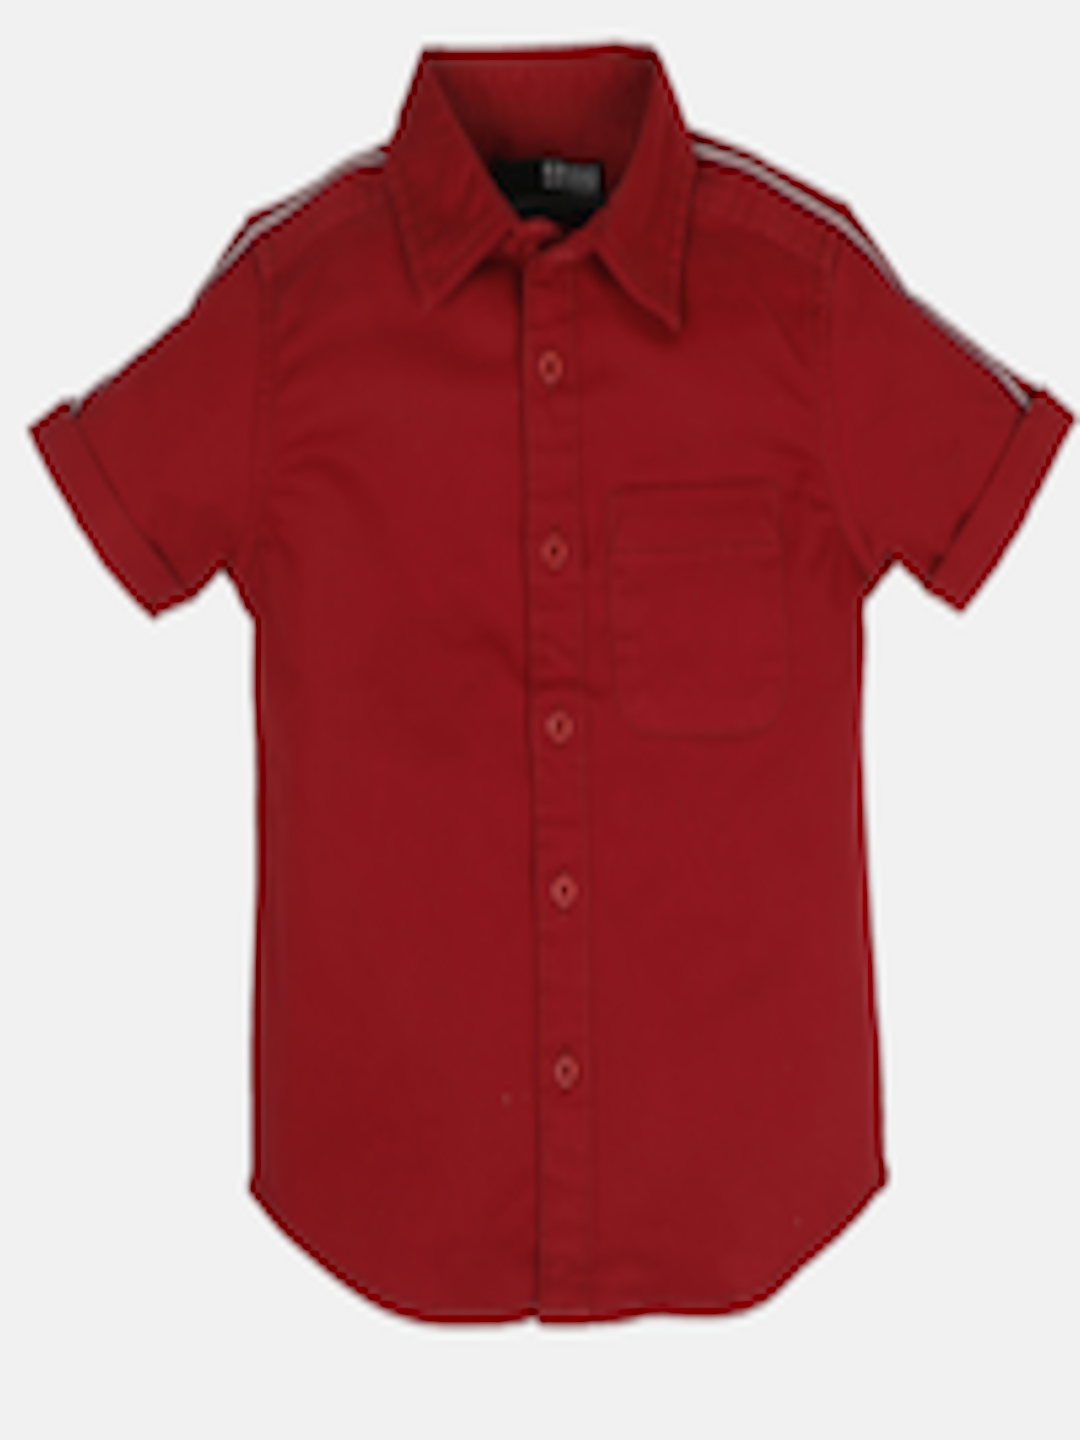 Buy HERE&NOW Boys Red Slim Fit Casual Shirt - Shirts for Boys 19149162 ...